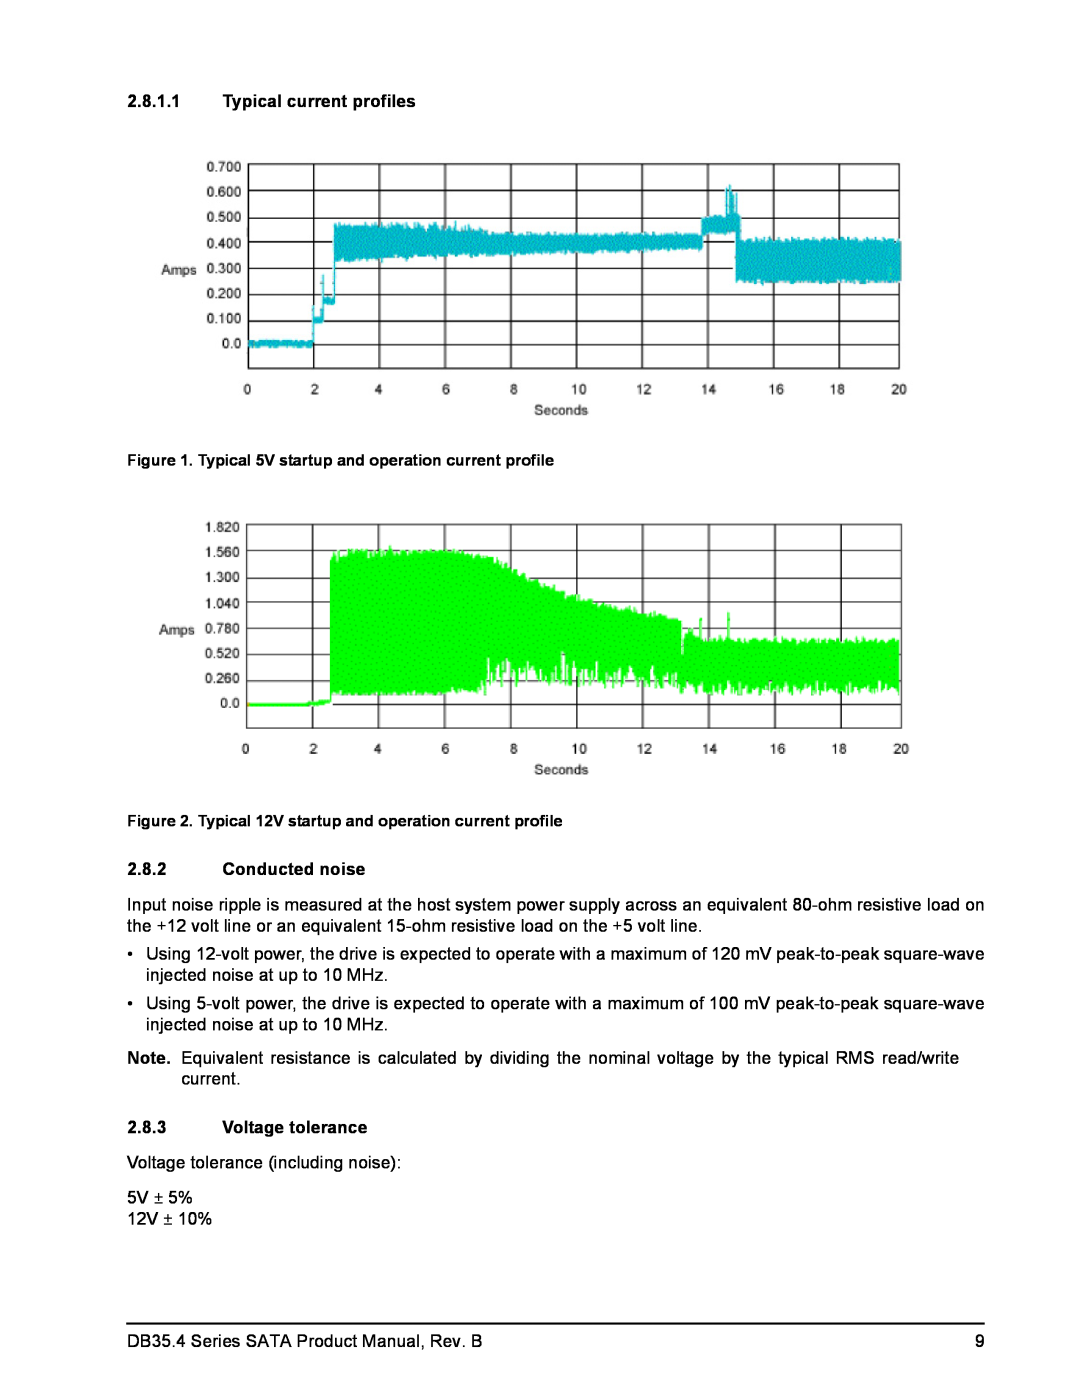 Seagate ST3250310CS manual Typical current profiles, Conducted noise, Voltage tolerance 